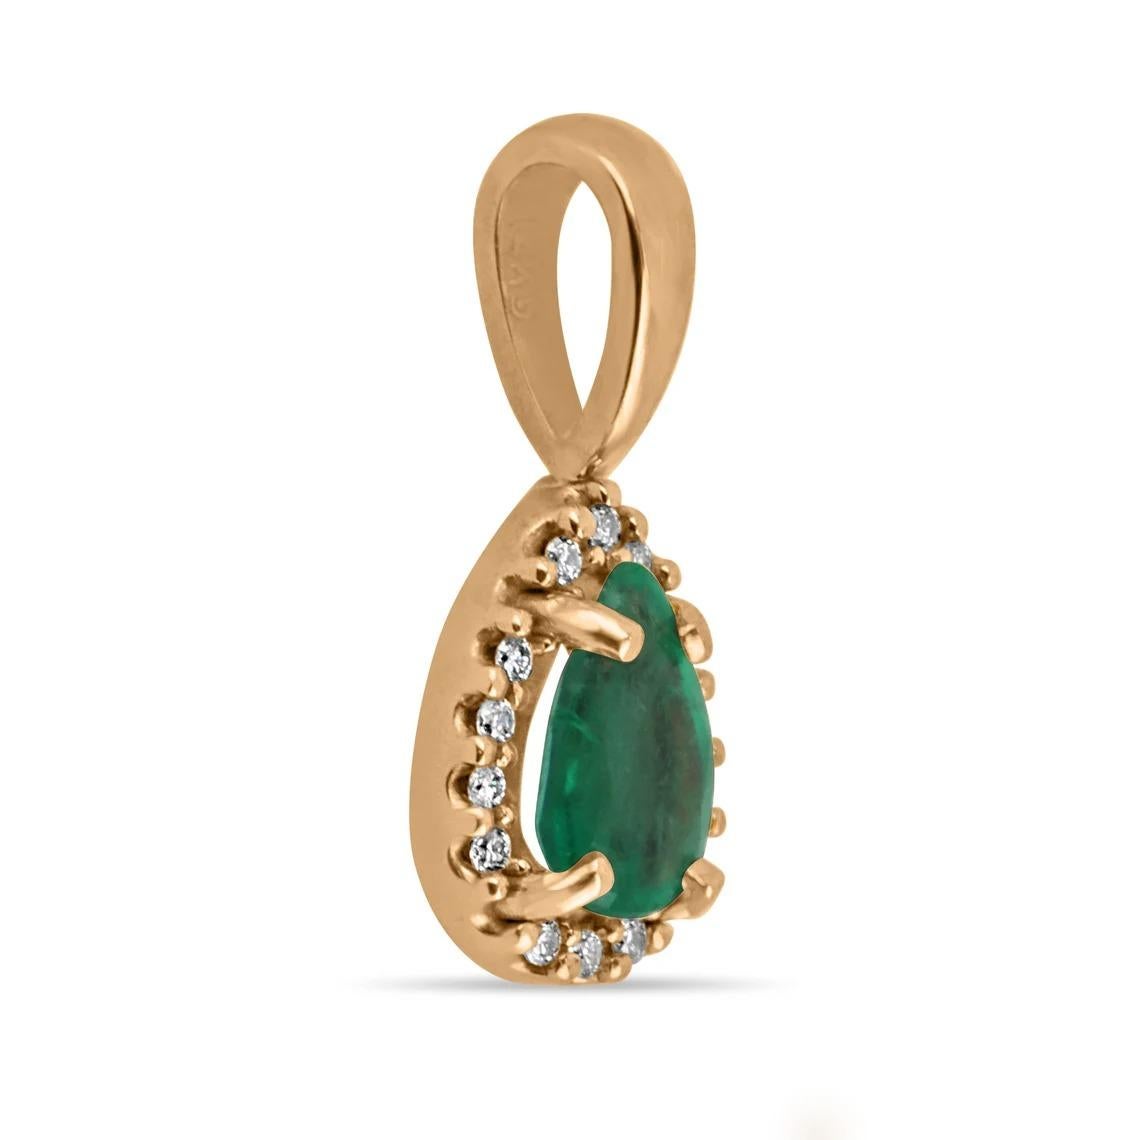 A stunning emerald and diamond pendant. This lovely piece showcases a petite 0.30-carat, natural Zambian emerald with a gorgeous medium yellowish-green color, and great characteristics. Securely prong-set; surrounding this gem is a halo of petite